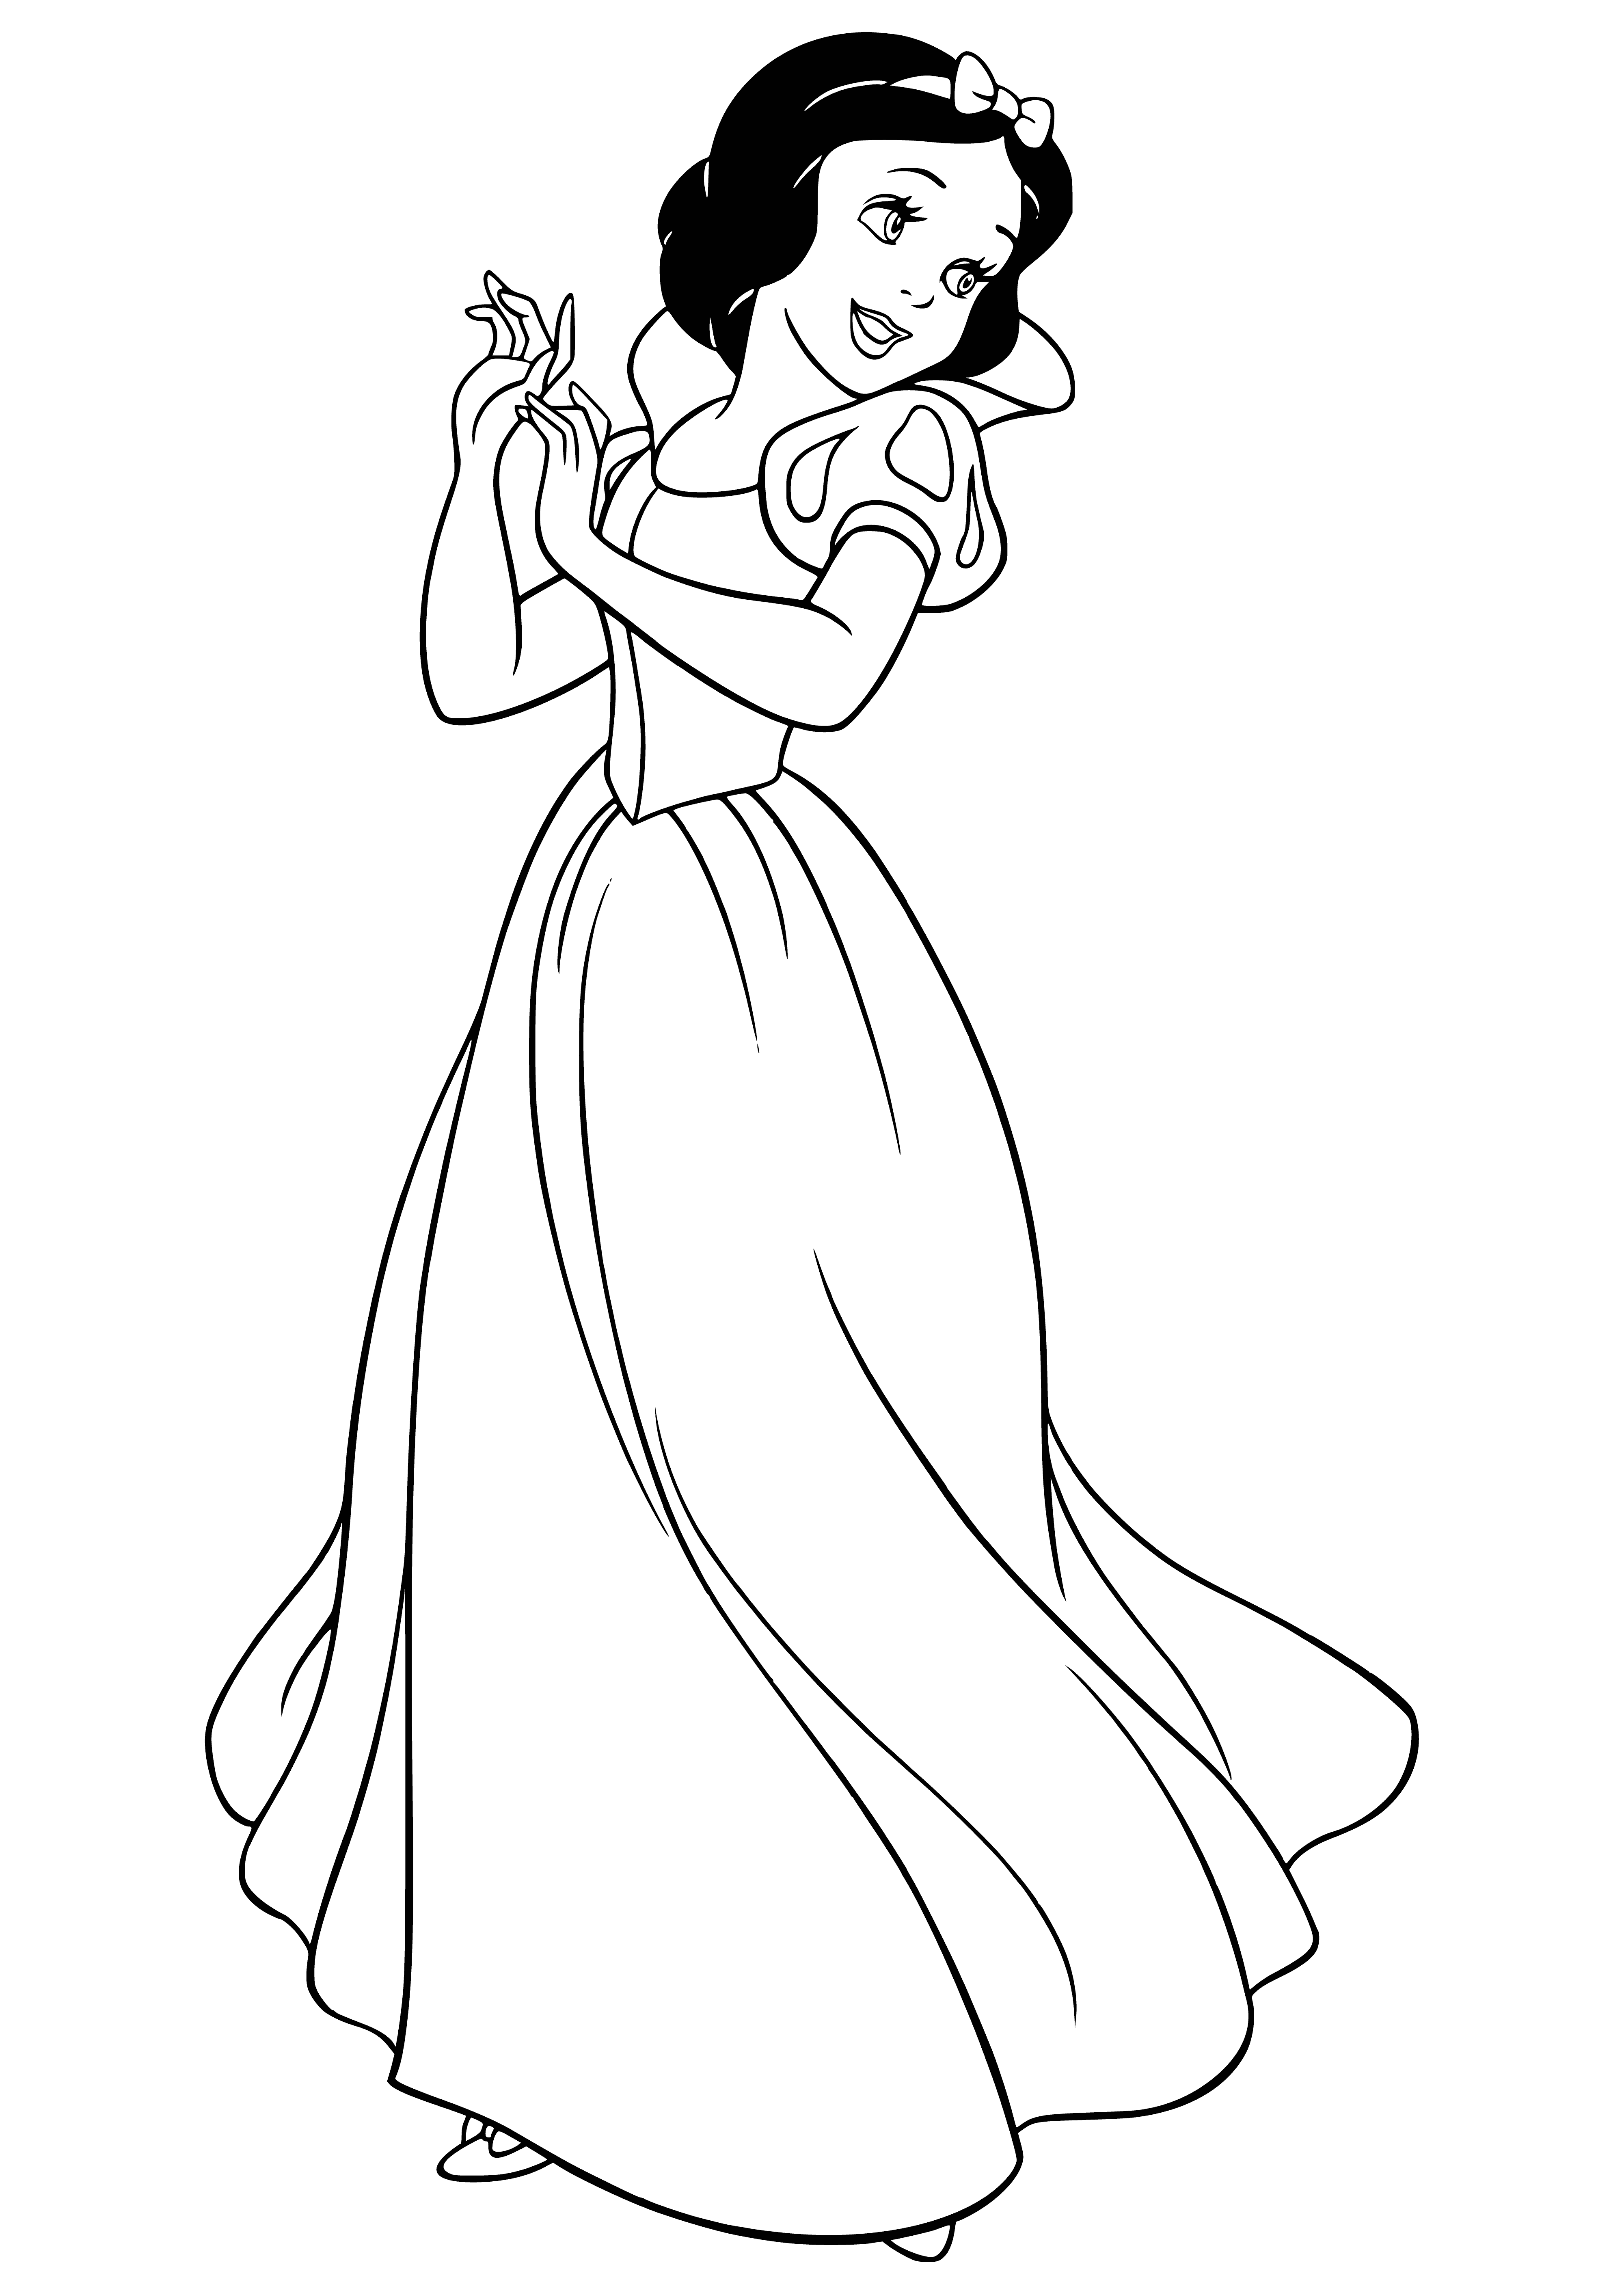 Full length snow white coloring page